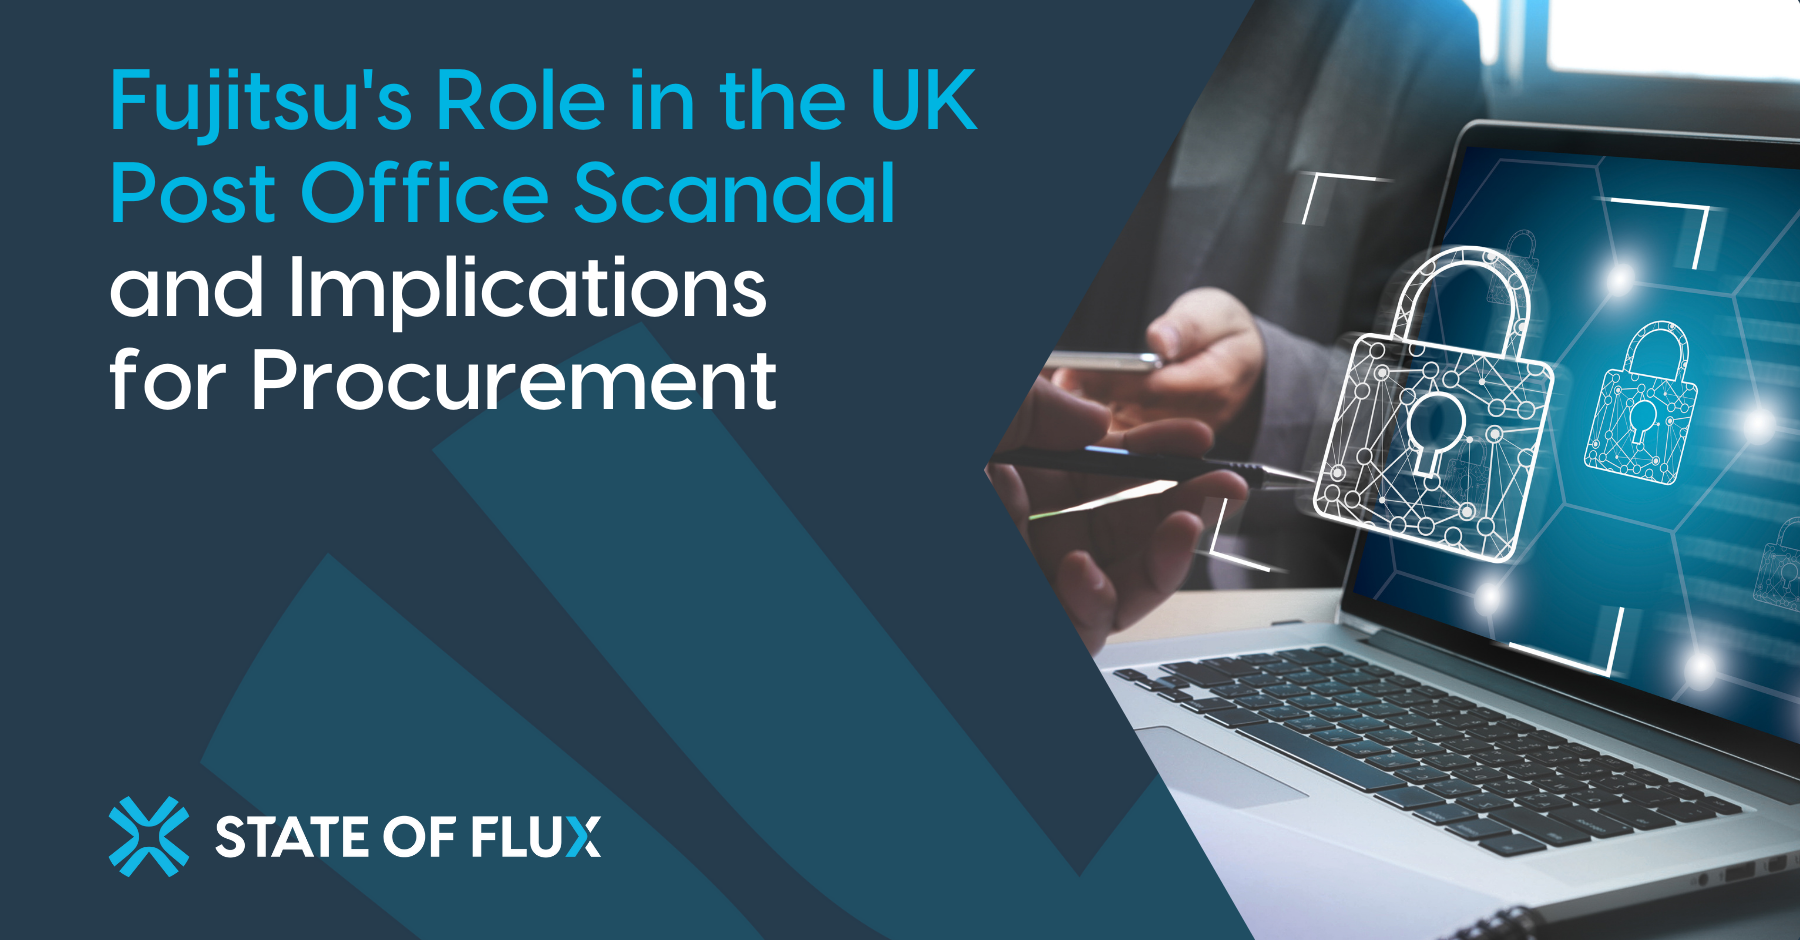 Fujitsu's Role in the UK Post Office Scandal and Implications for Procurement